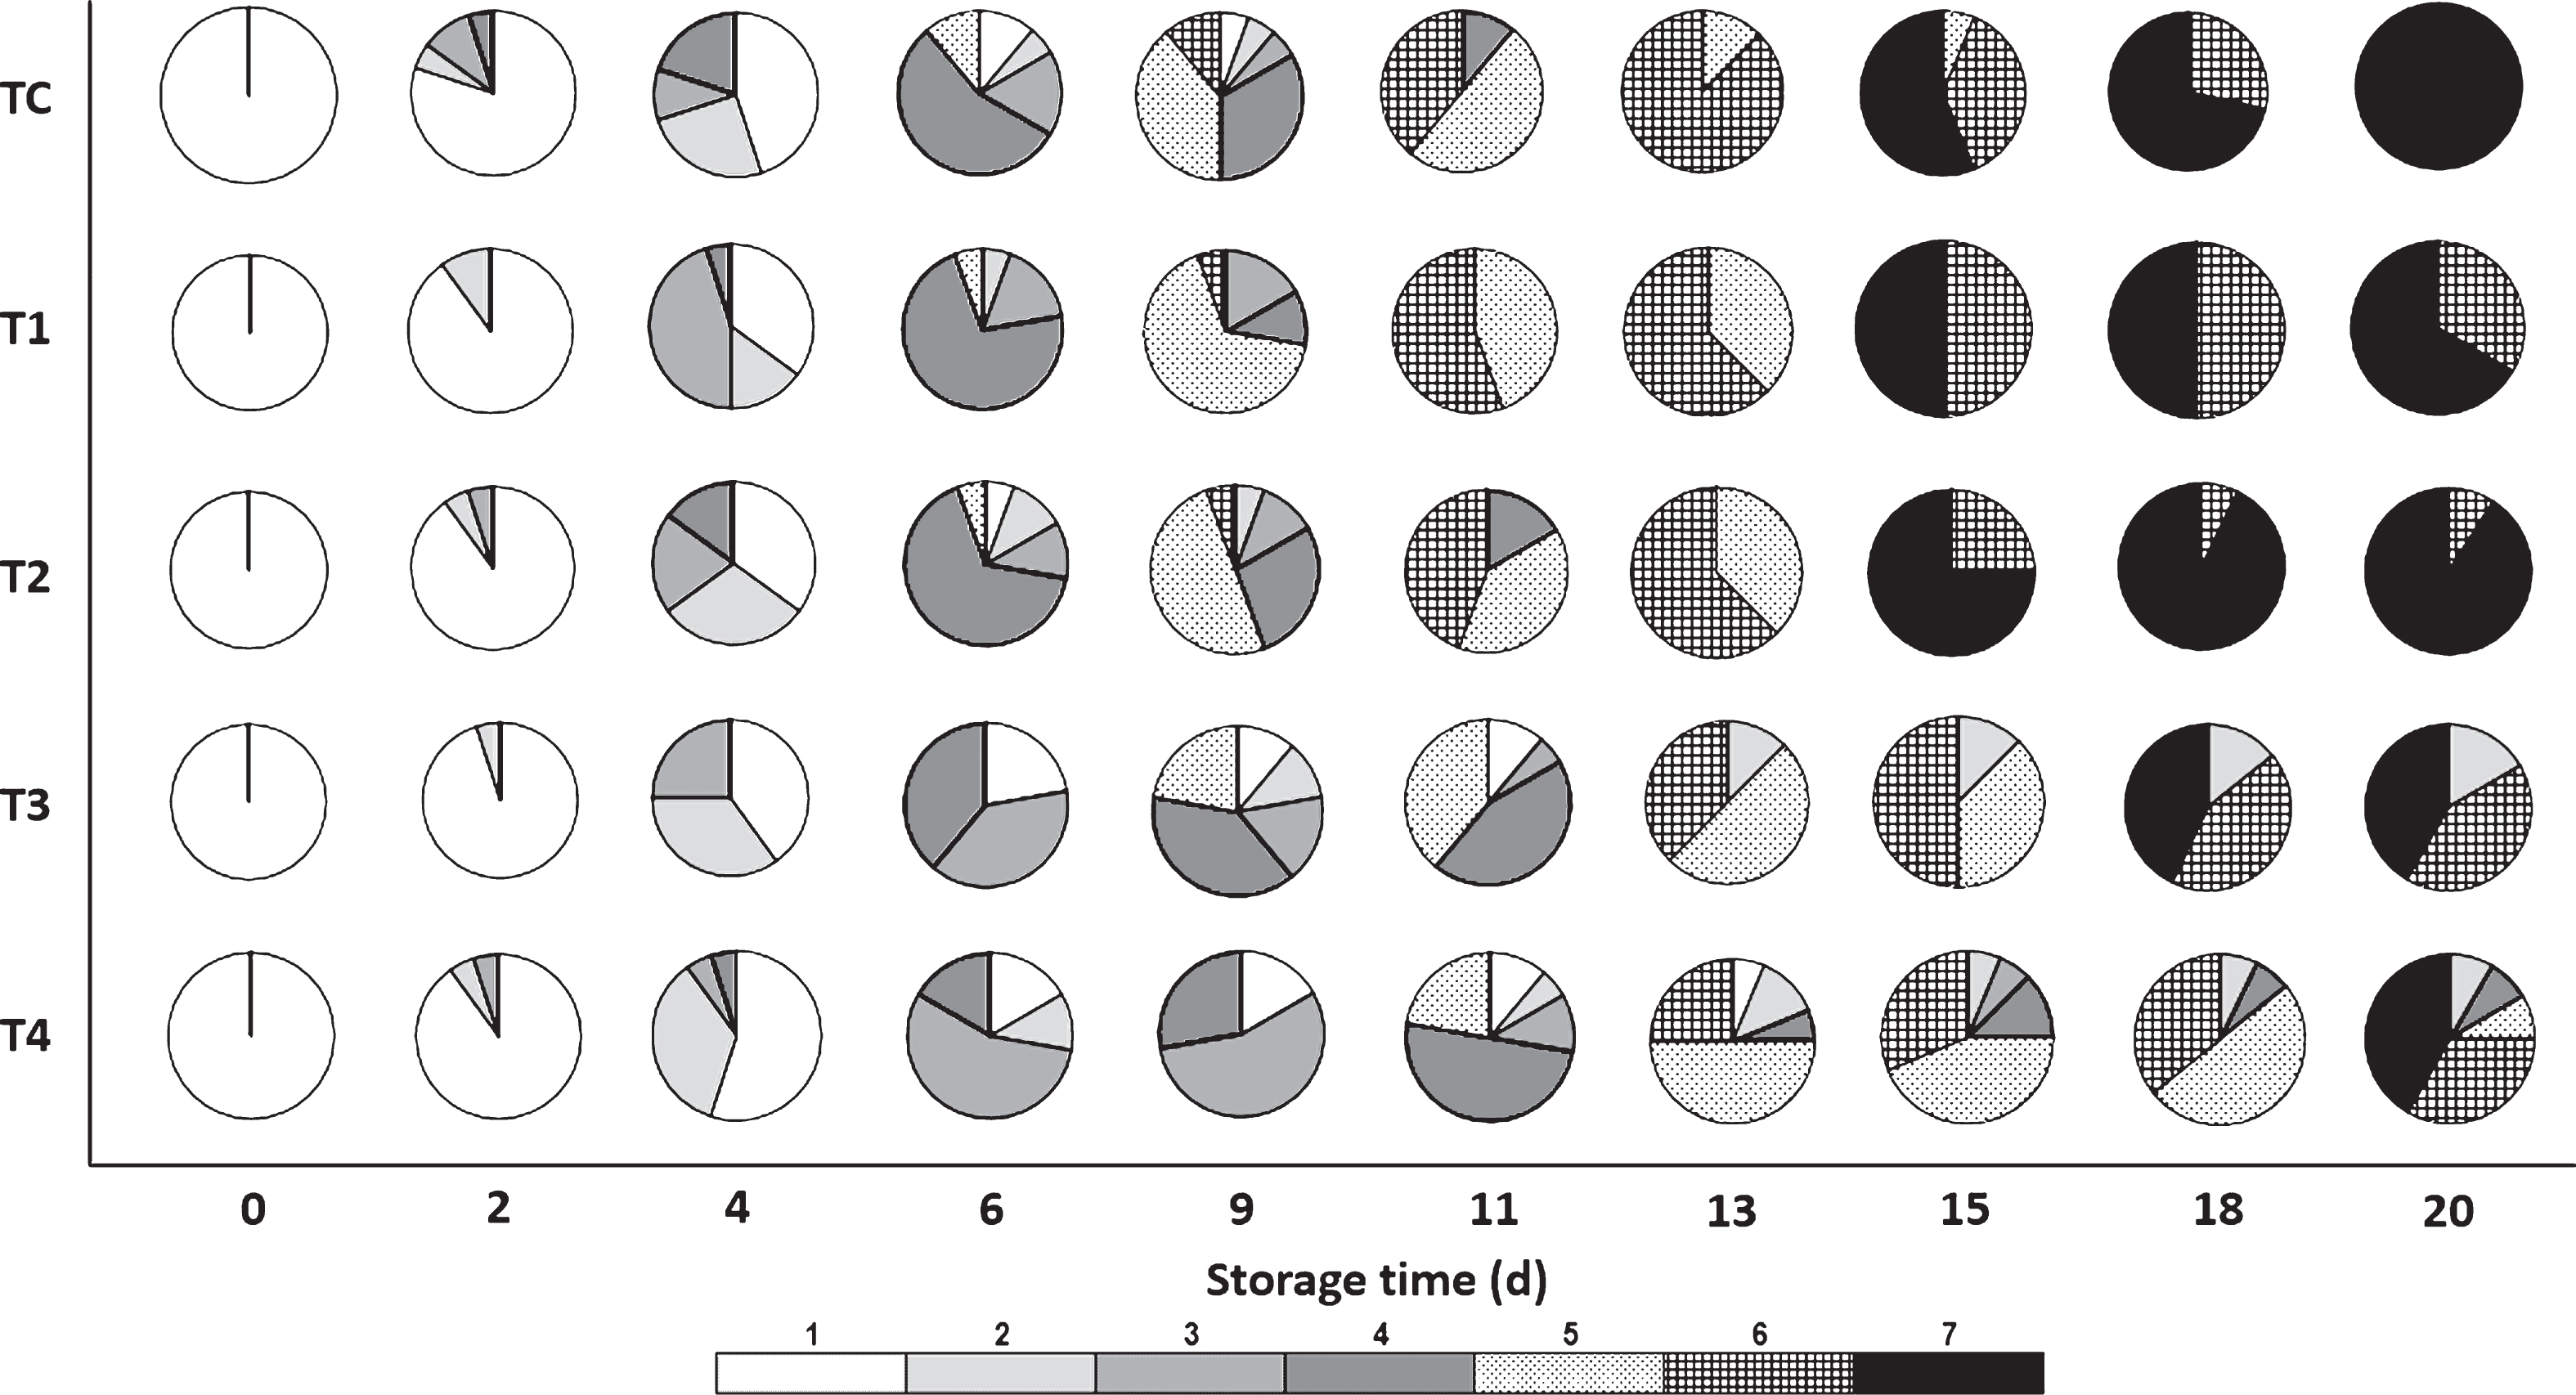 Ripening stage distribution of tomatoes during storage of uncoated fruits (TC) and fruits coated with chitosan and olive oil at different concentrations. In the color visual scale, the extremes, 1 and 7, represent green and red colors, respectively.